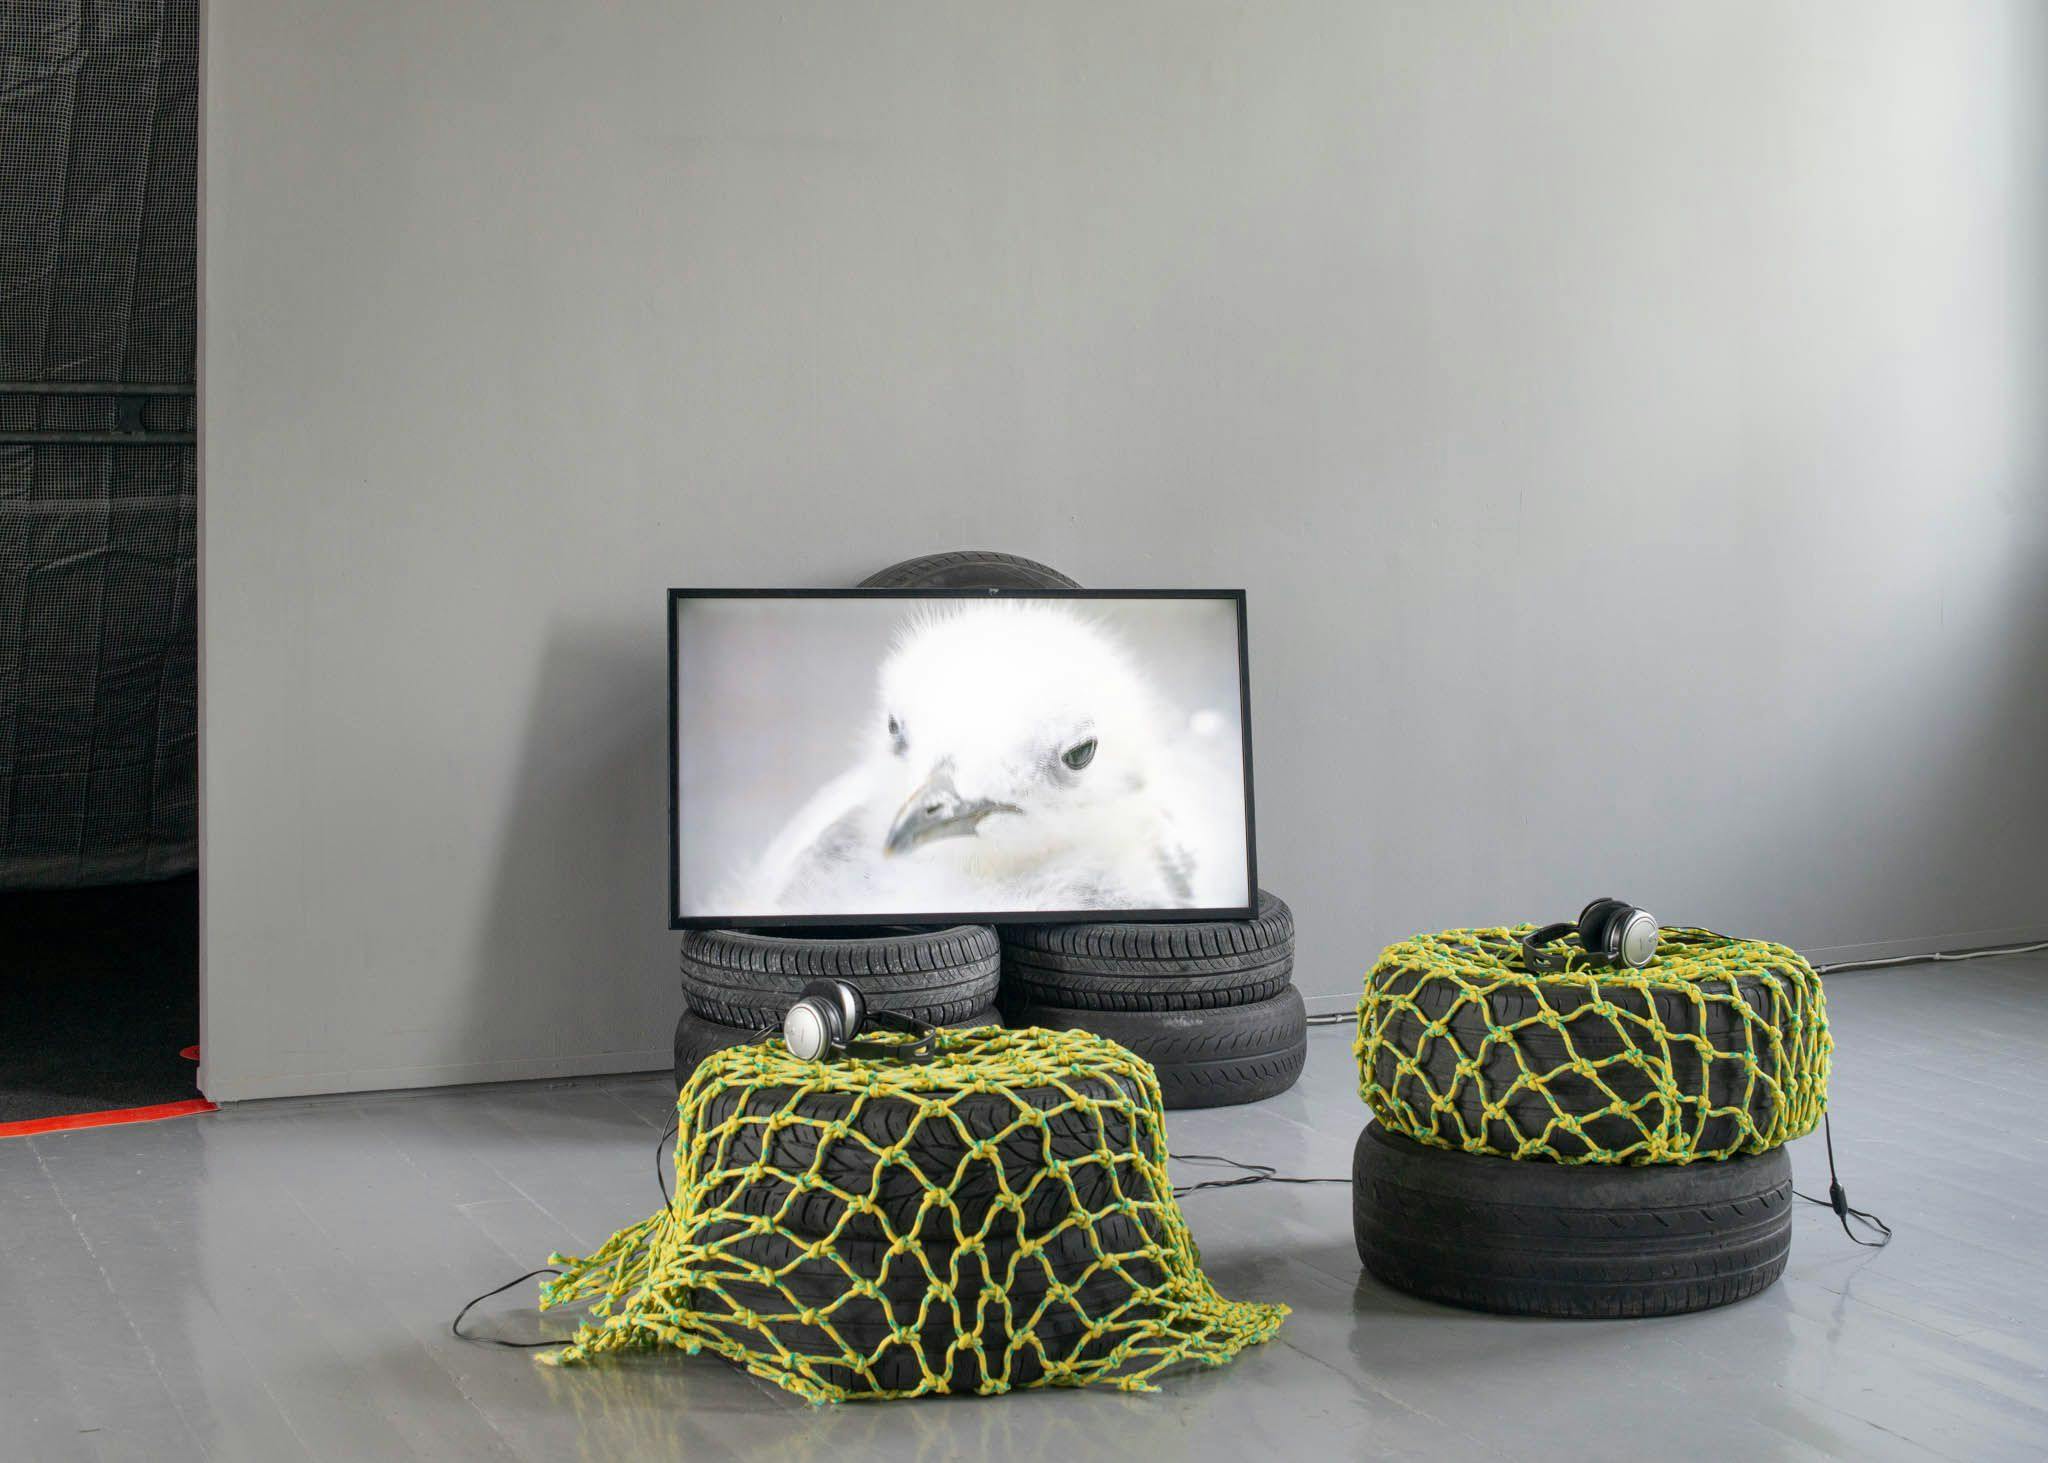 A TV screen shows a baby gull behind two seats made from tyres and yellow netting.